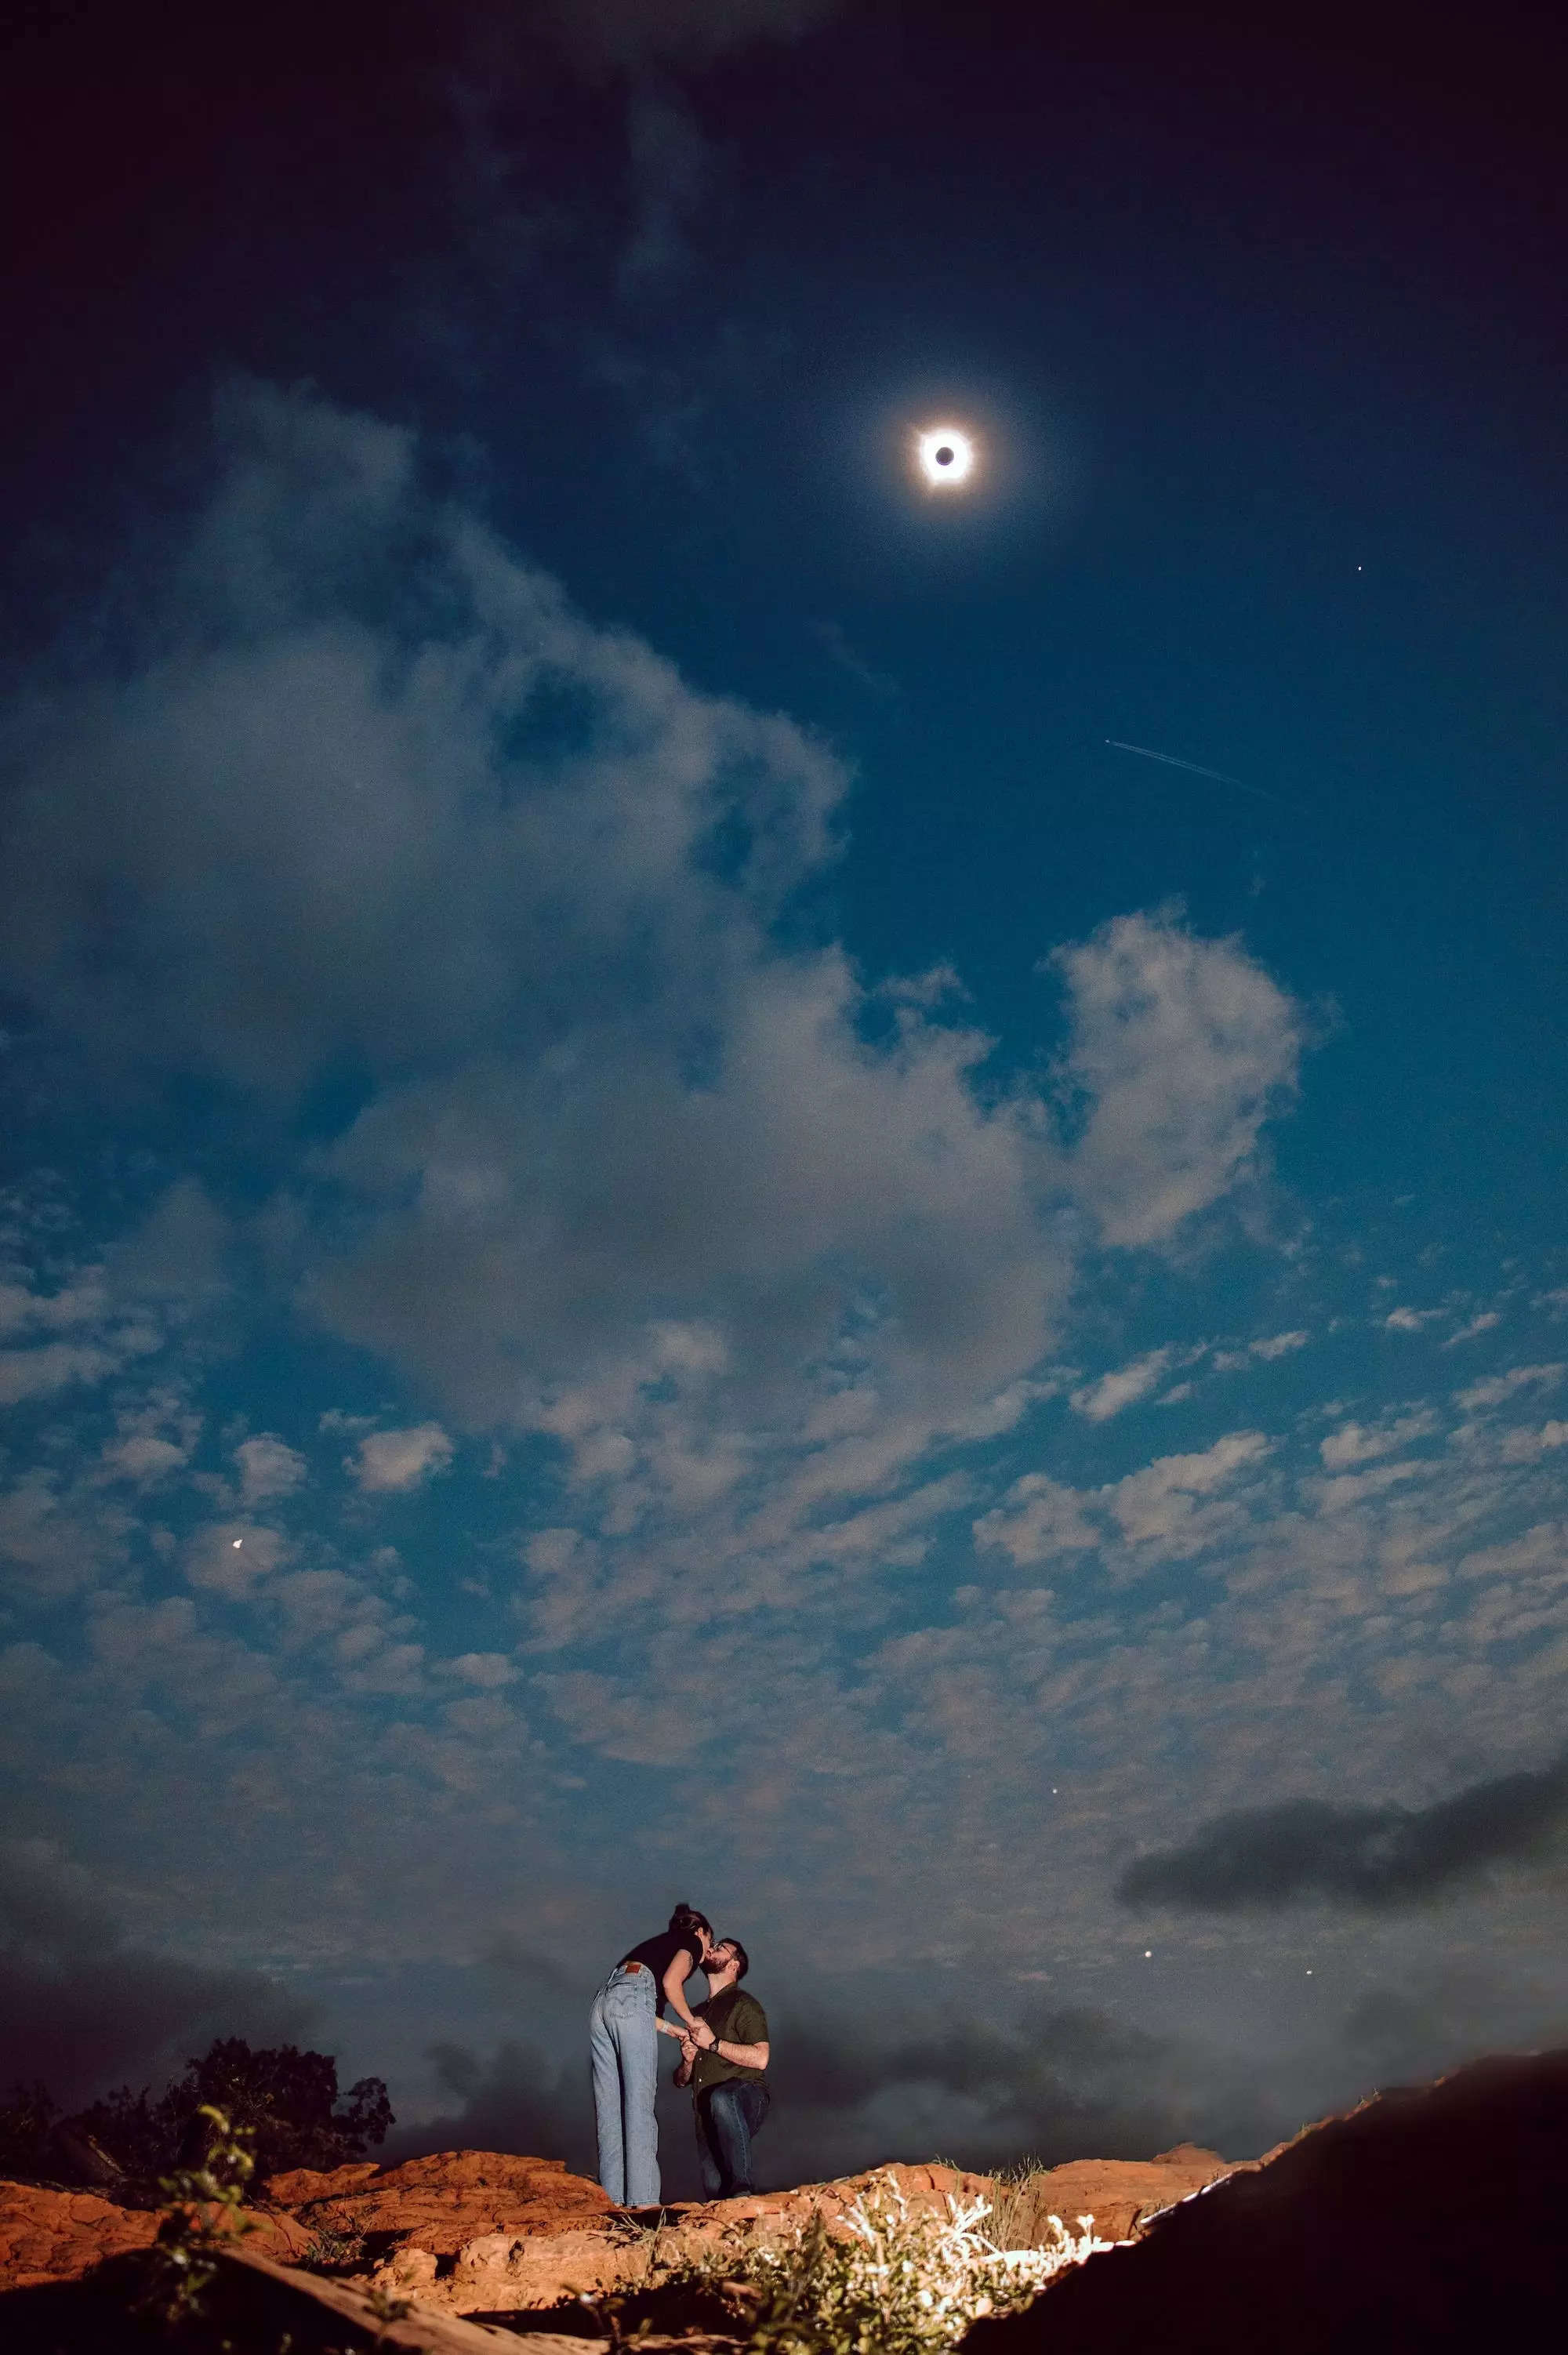 A couple kisses after he proposes in front of a solar eclipse.